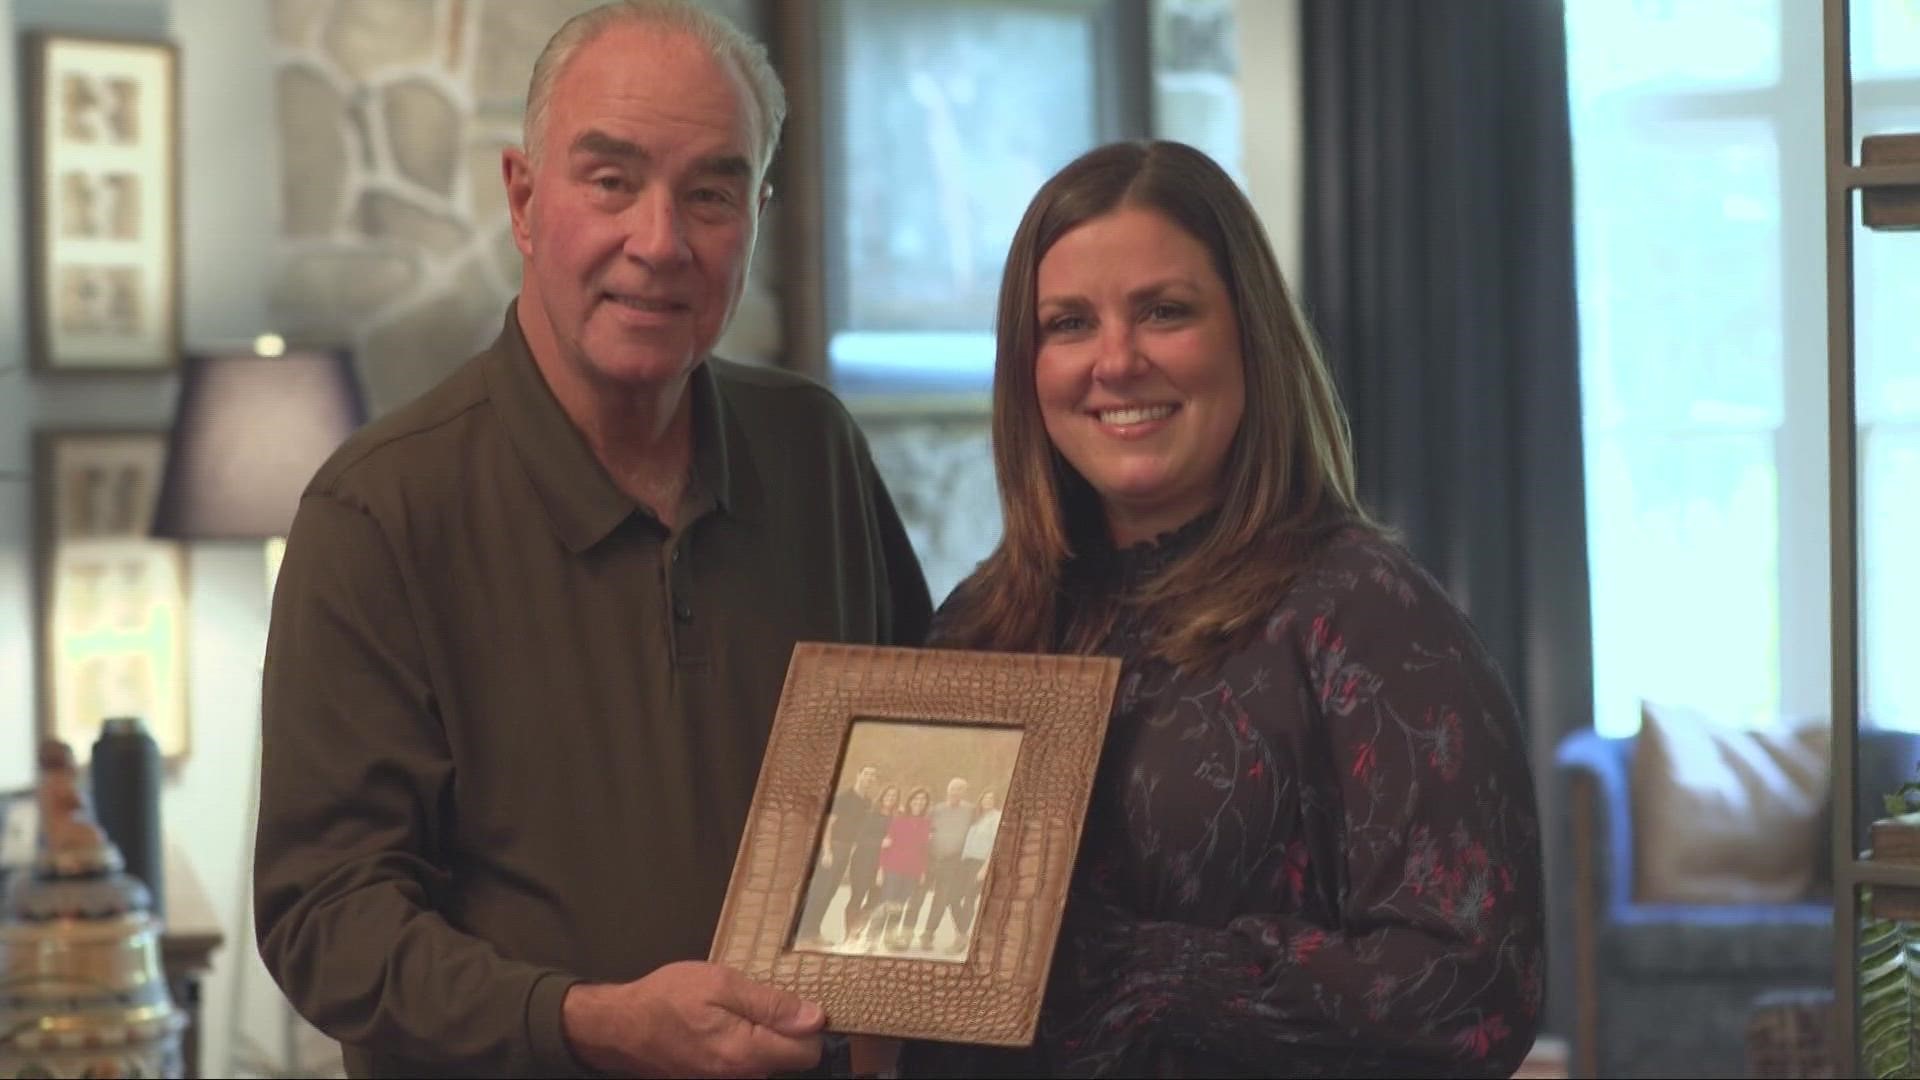 The story of the Herzog family and how they honor their late wife/mother who passed after a battle with Alzheimer's disease. Laura Caso reports.